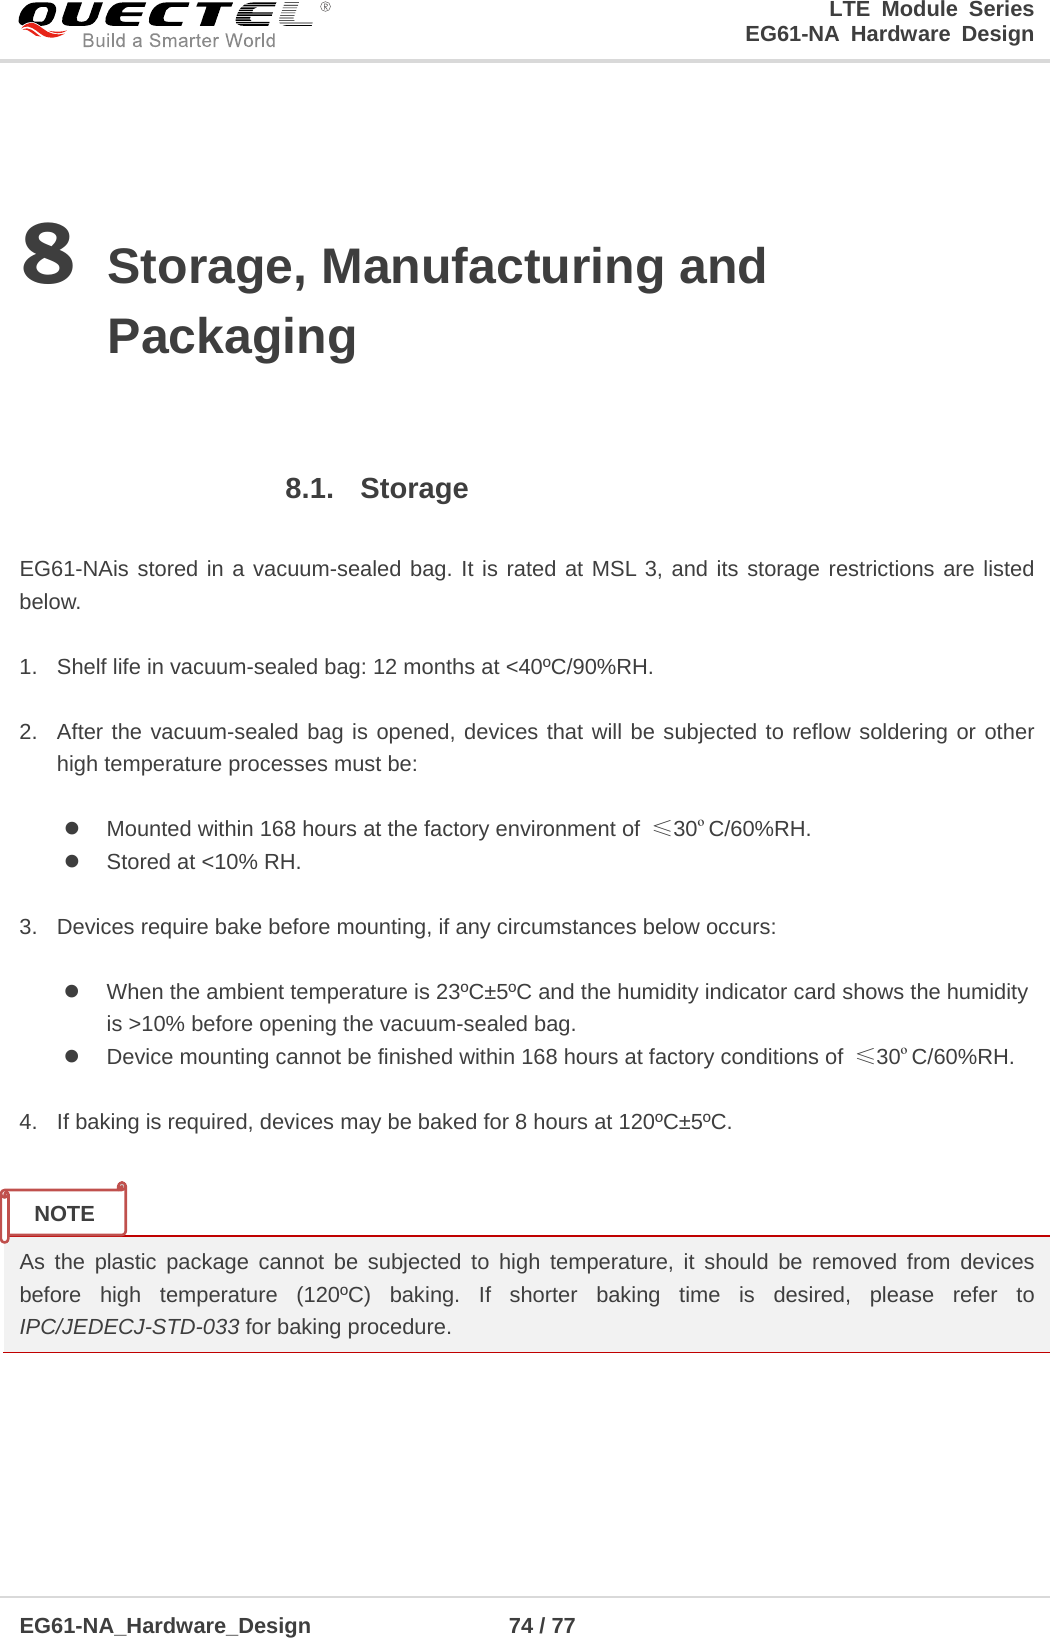 LTE Module Series                                                  EG61-NA Hardware Design  EG61-NA_Hardware_Design                  74 / 77    8 Storage, Manufacturing and Packaging  8.1. Storage  EG61-NAis stored in a vacuum-sealed bag. It is rated at MSL 3, and its storage restrictions are listed below.    1. Shelf life in vacuum-sealed bag: 12 months at &lt;40ºC/90%RH.    2. After the vacuum-sealed bag is opened, devices that will be subjected to reflow soldering or other high temperature processes must be:   Mounted within 168 hours at the factory environment of  ≤30ºC/60%RH.  Stored at &lt;10% RH.  3. Devices require bake before mounting, if any circumstances below occurs:   When the ambient temperature is 23ºC±5ºC and the humidity indicator card shows the humidity          is &gt;10% before opening the vacuum-sealed bag.  Device mounting cannot be finished within 168 hours at factory conditions of  ≤30ºC/60%RH.  4. If baking is required, devices may be baked for 8 hours at 120ºC±5ºC.   As the plastic  package cannot be subjected to high temperature, it should be removed from devices before  high temperature (120ºC) baking. If shorter baking time is desired, please refer to IPC/JEDECJ-STD-033 for baking procedure.    NOTE 